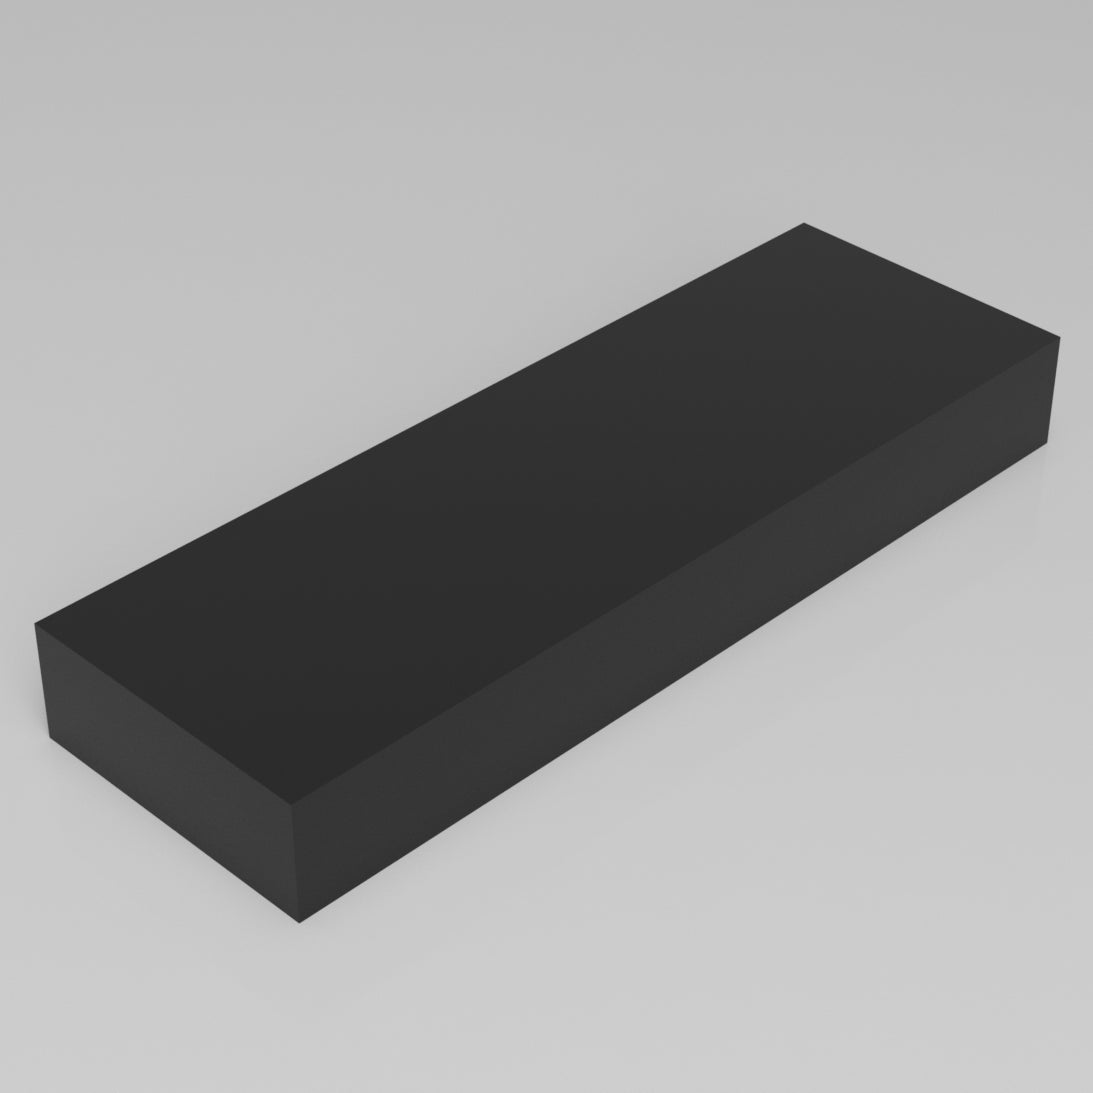 Machinable Wax Rectangular Block Front View 3 Inch by 8 Inch by 24 Inch